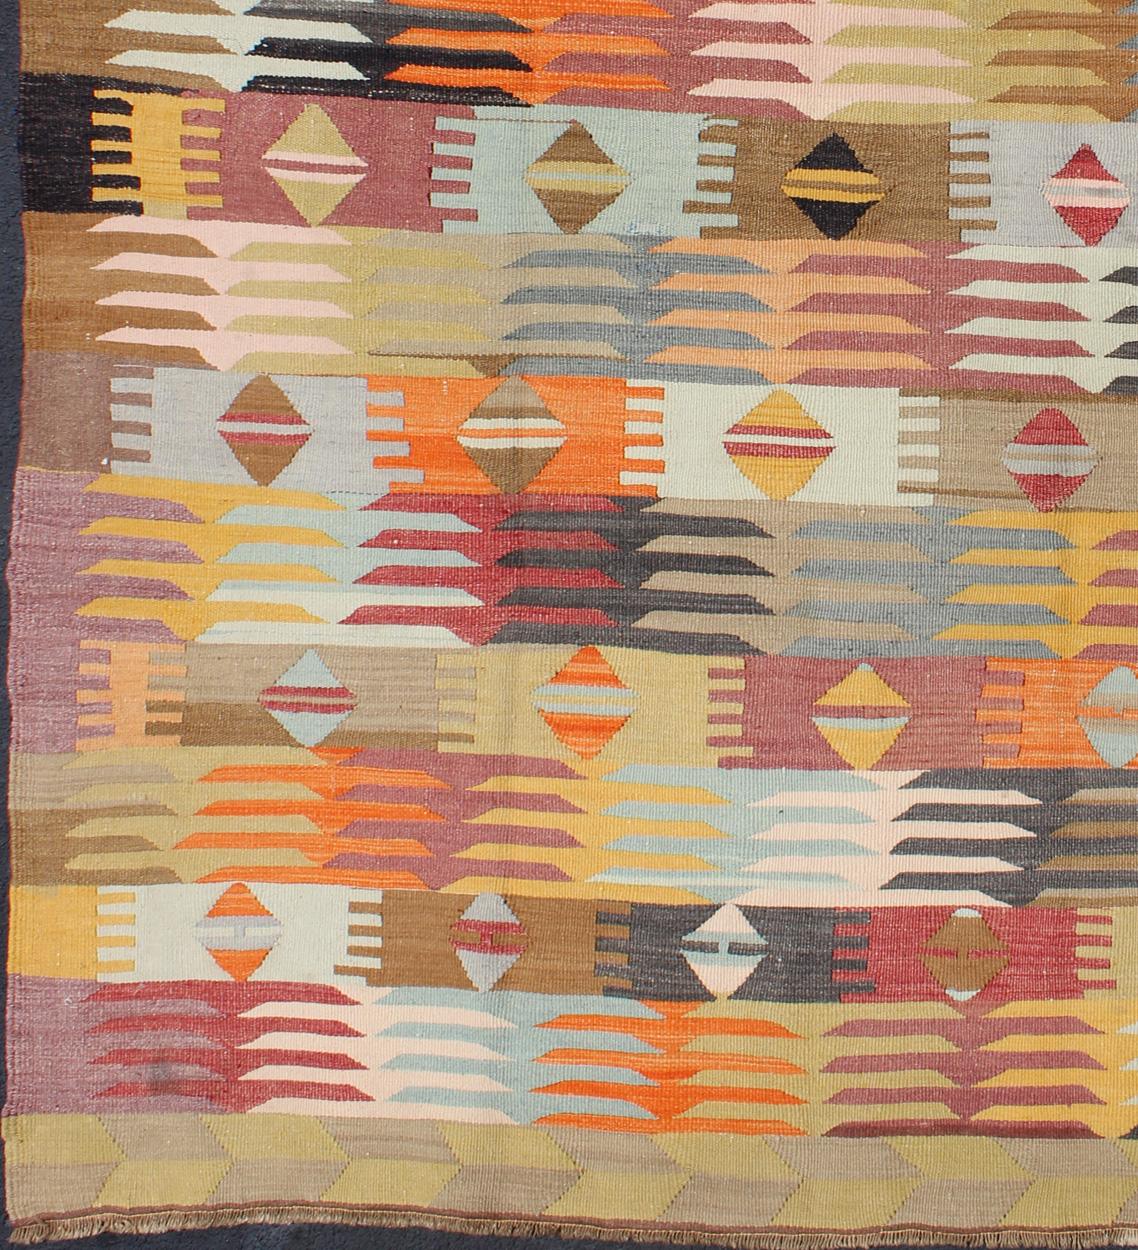 Hand-Woven Colorful Vintage Turkish Kilim with All-Over Latching Design & Geometric Shapes For Sale